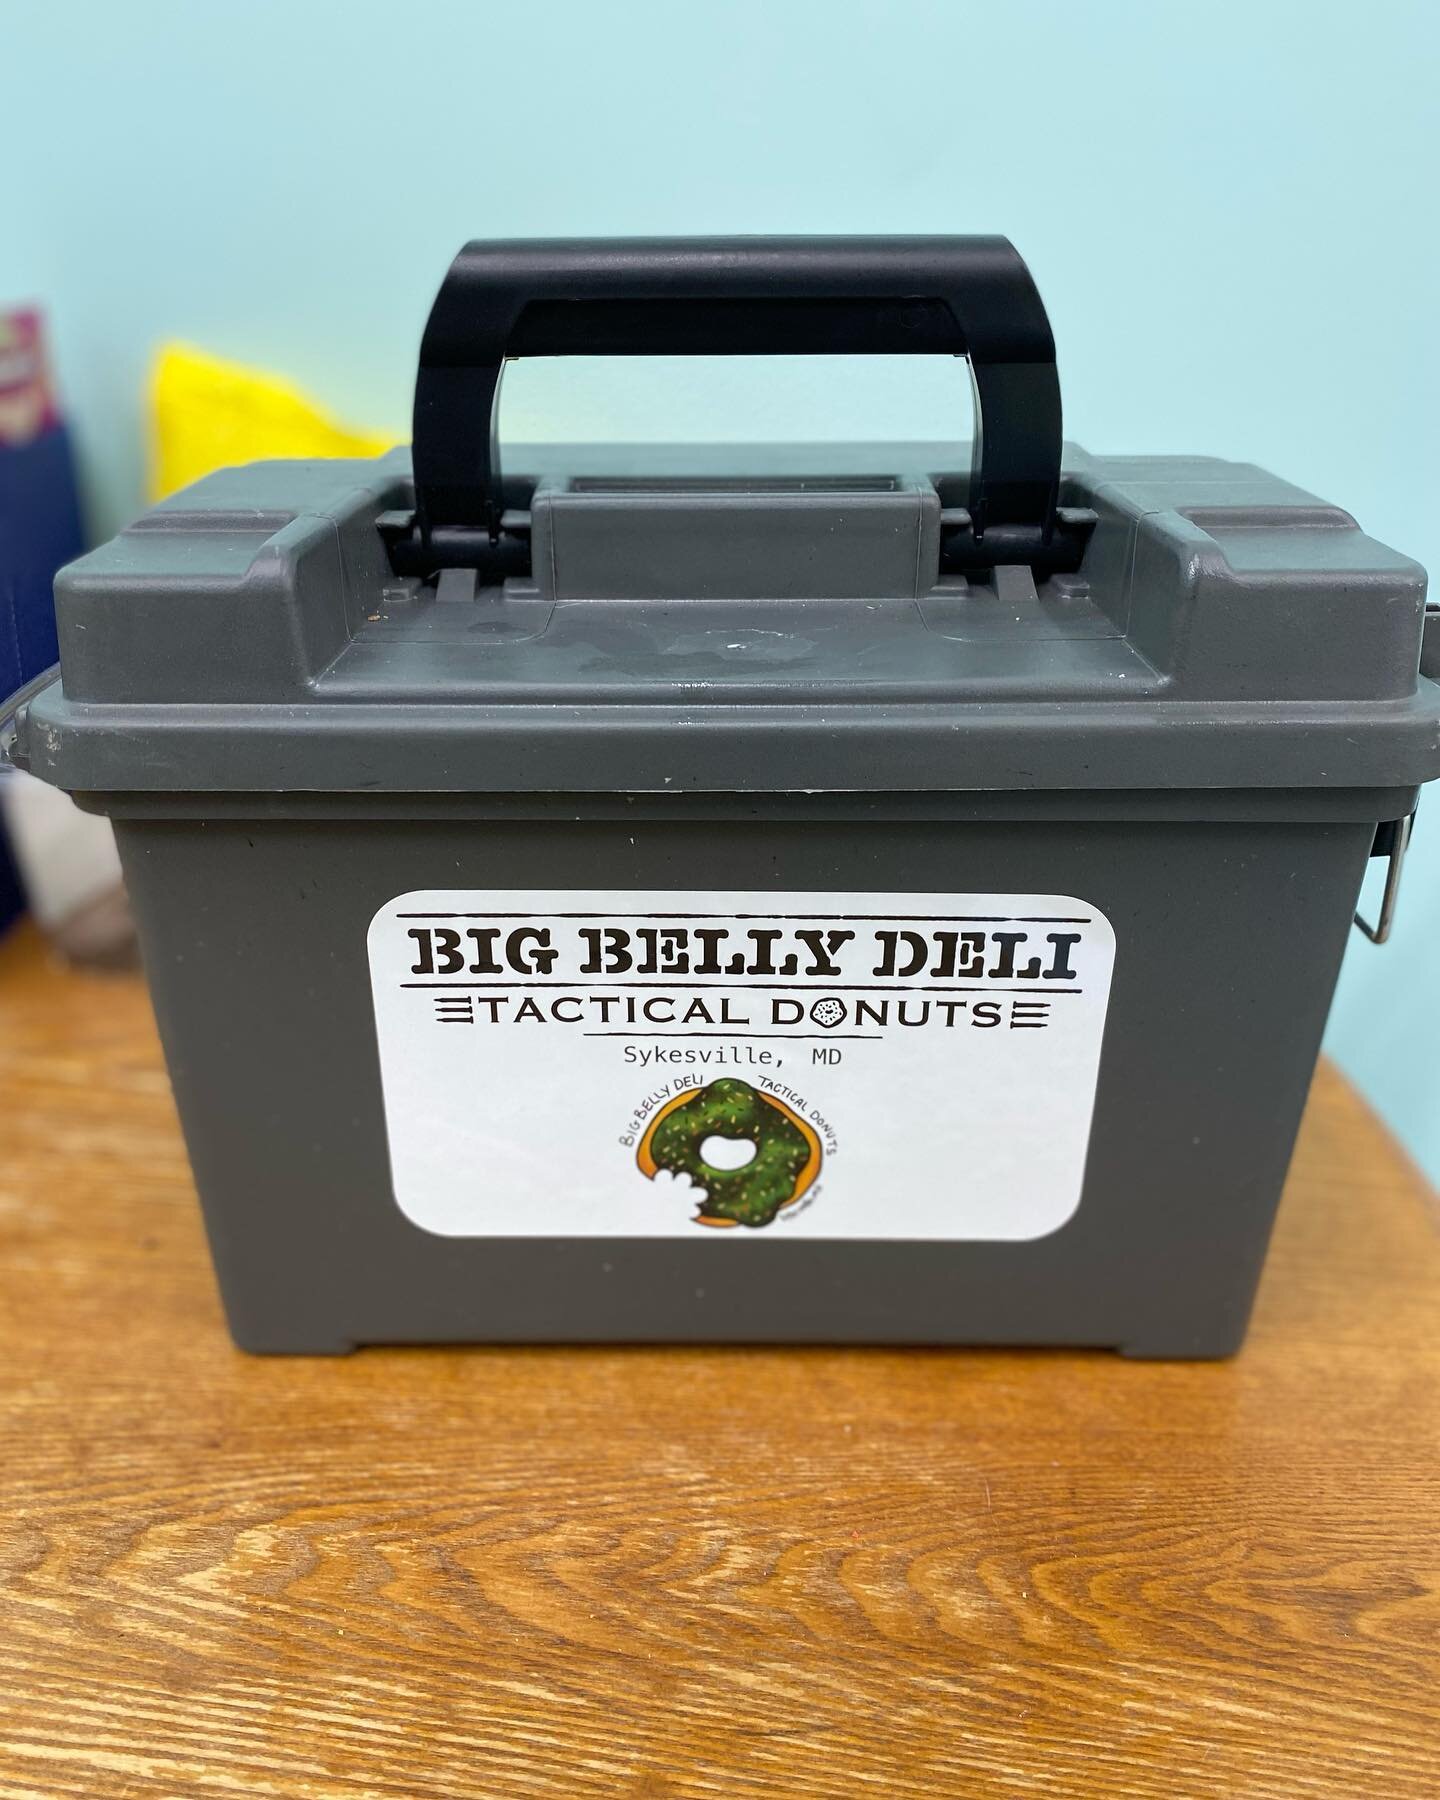 On 5/11 we were gifted the amazing Big Belly Deli @bigbellydeli donuts from Jasmines momma and this Friday we were gifted for the THIRD TIME a pizza lunch from Lunas dad! 😮 I&rsquo;ll say it once and I&rsquo;ll say it again, we are spoiled with the 